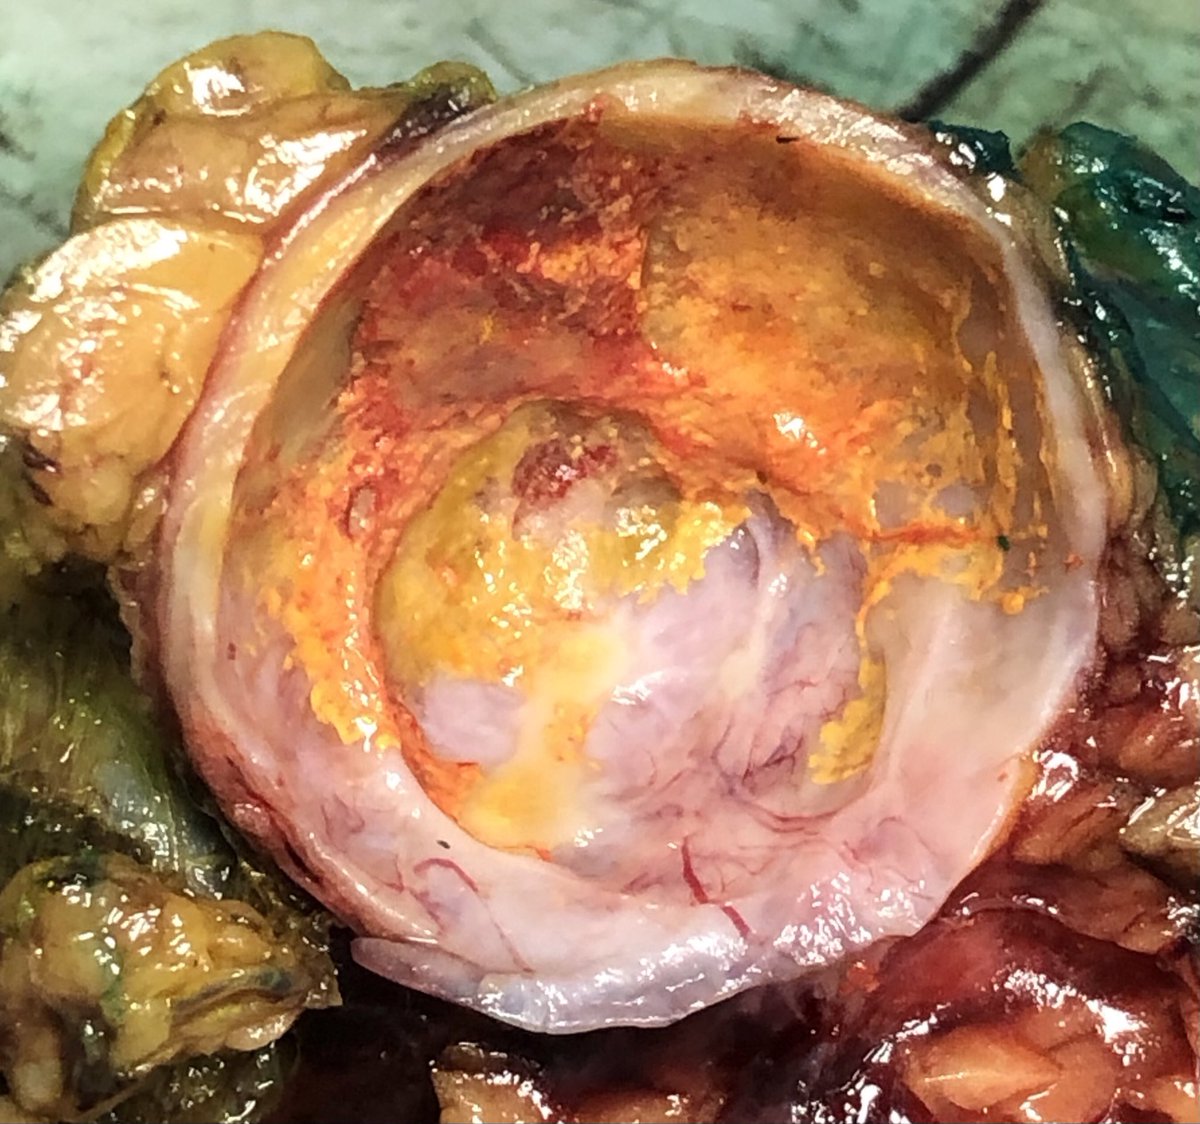 43 year old, female, distal pancreatectomy. No connection w ducts. Any guesses? #grossognosis #pancreas #cyst